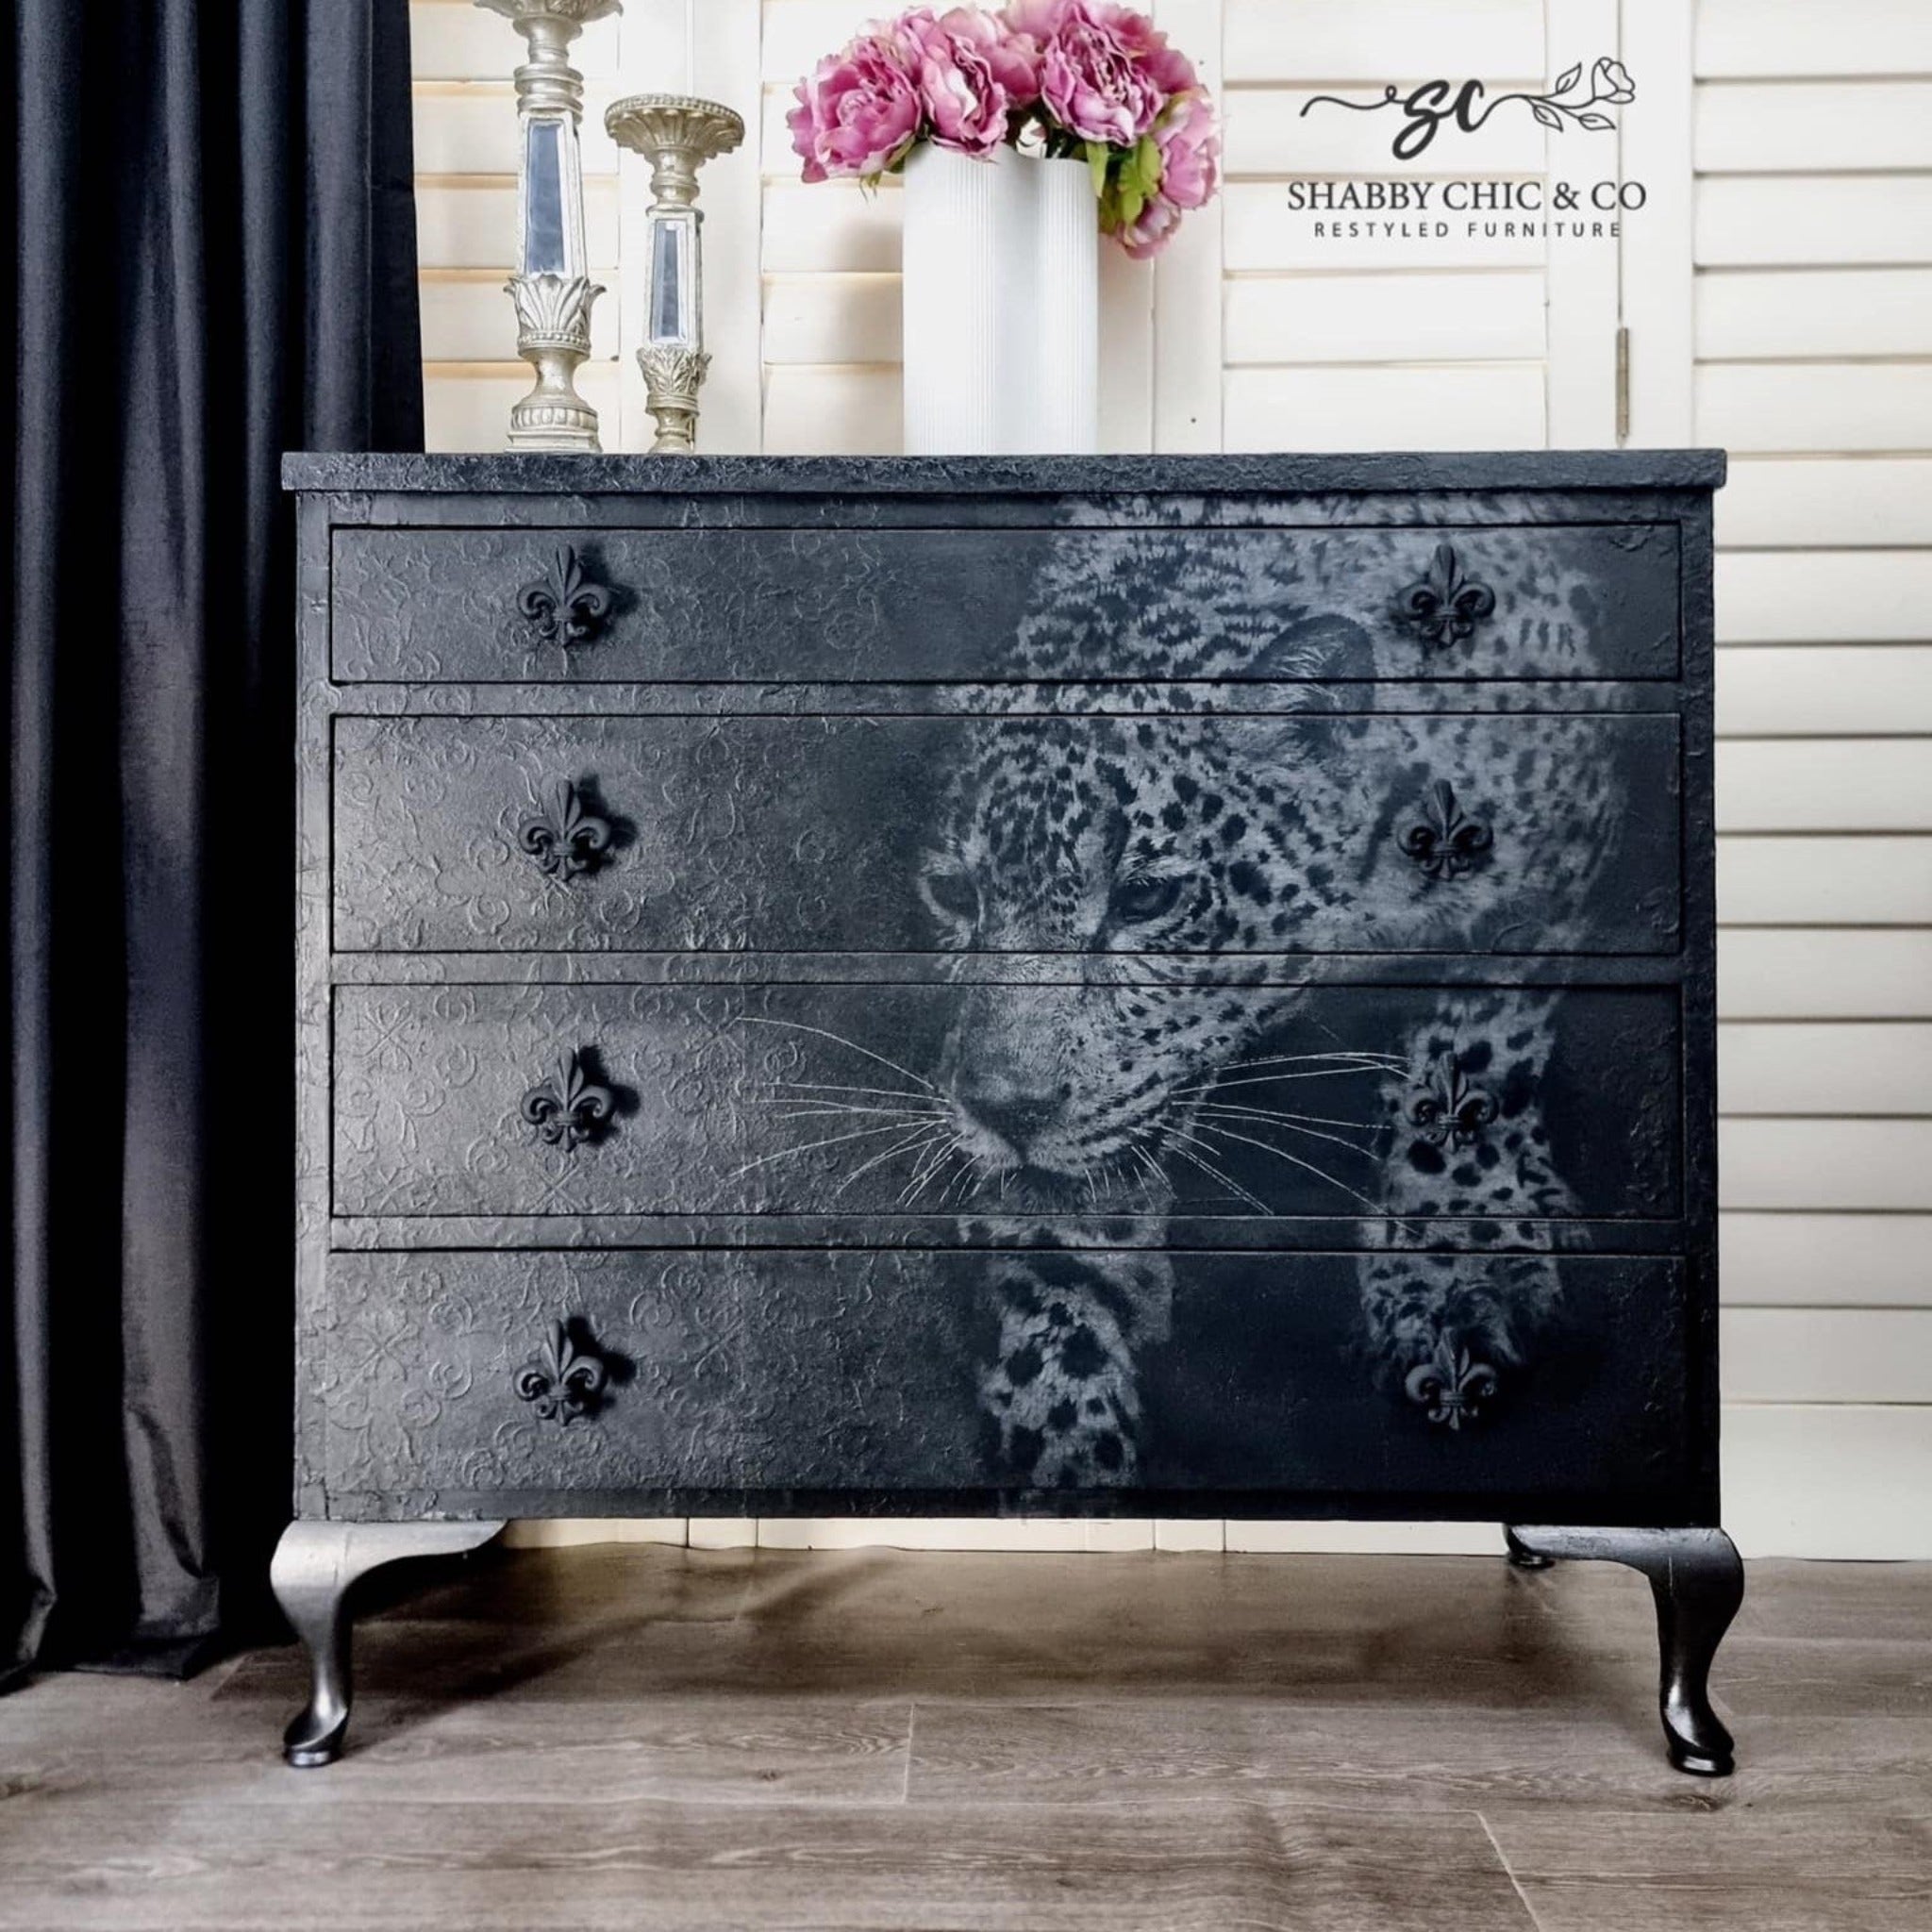 A vintage 4-drawer dresser refurbished by Shabby & Chic Co. is painted black and features ReDesign with Prima's Feline Gaze A1 fiber paper down the front right side.